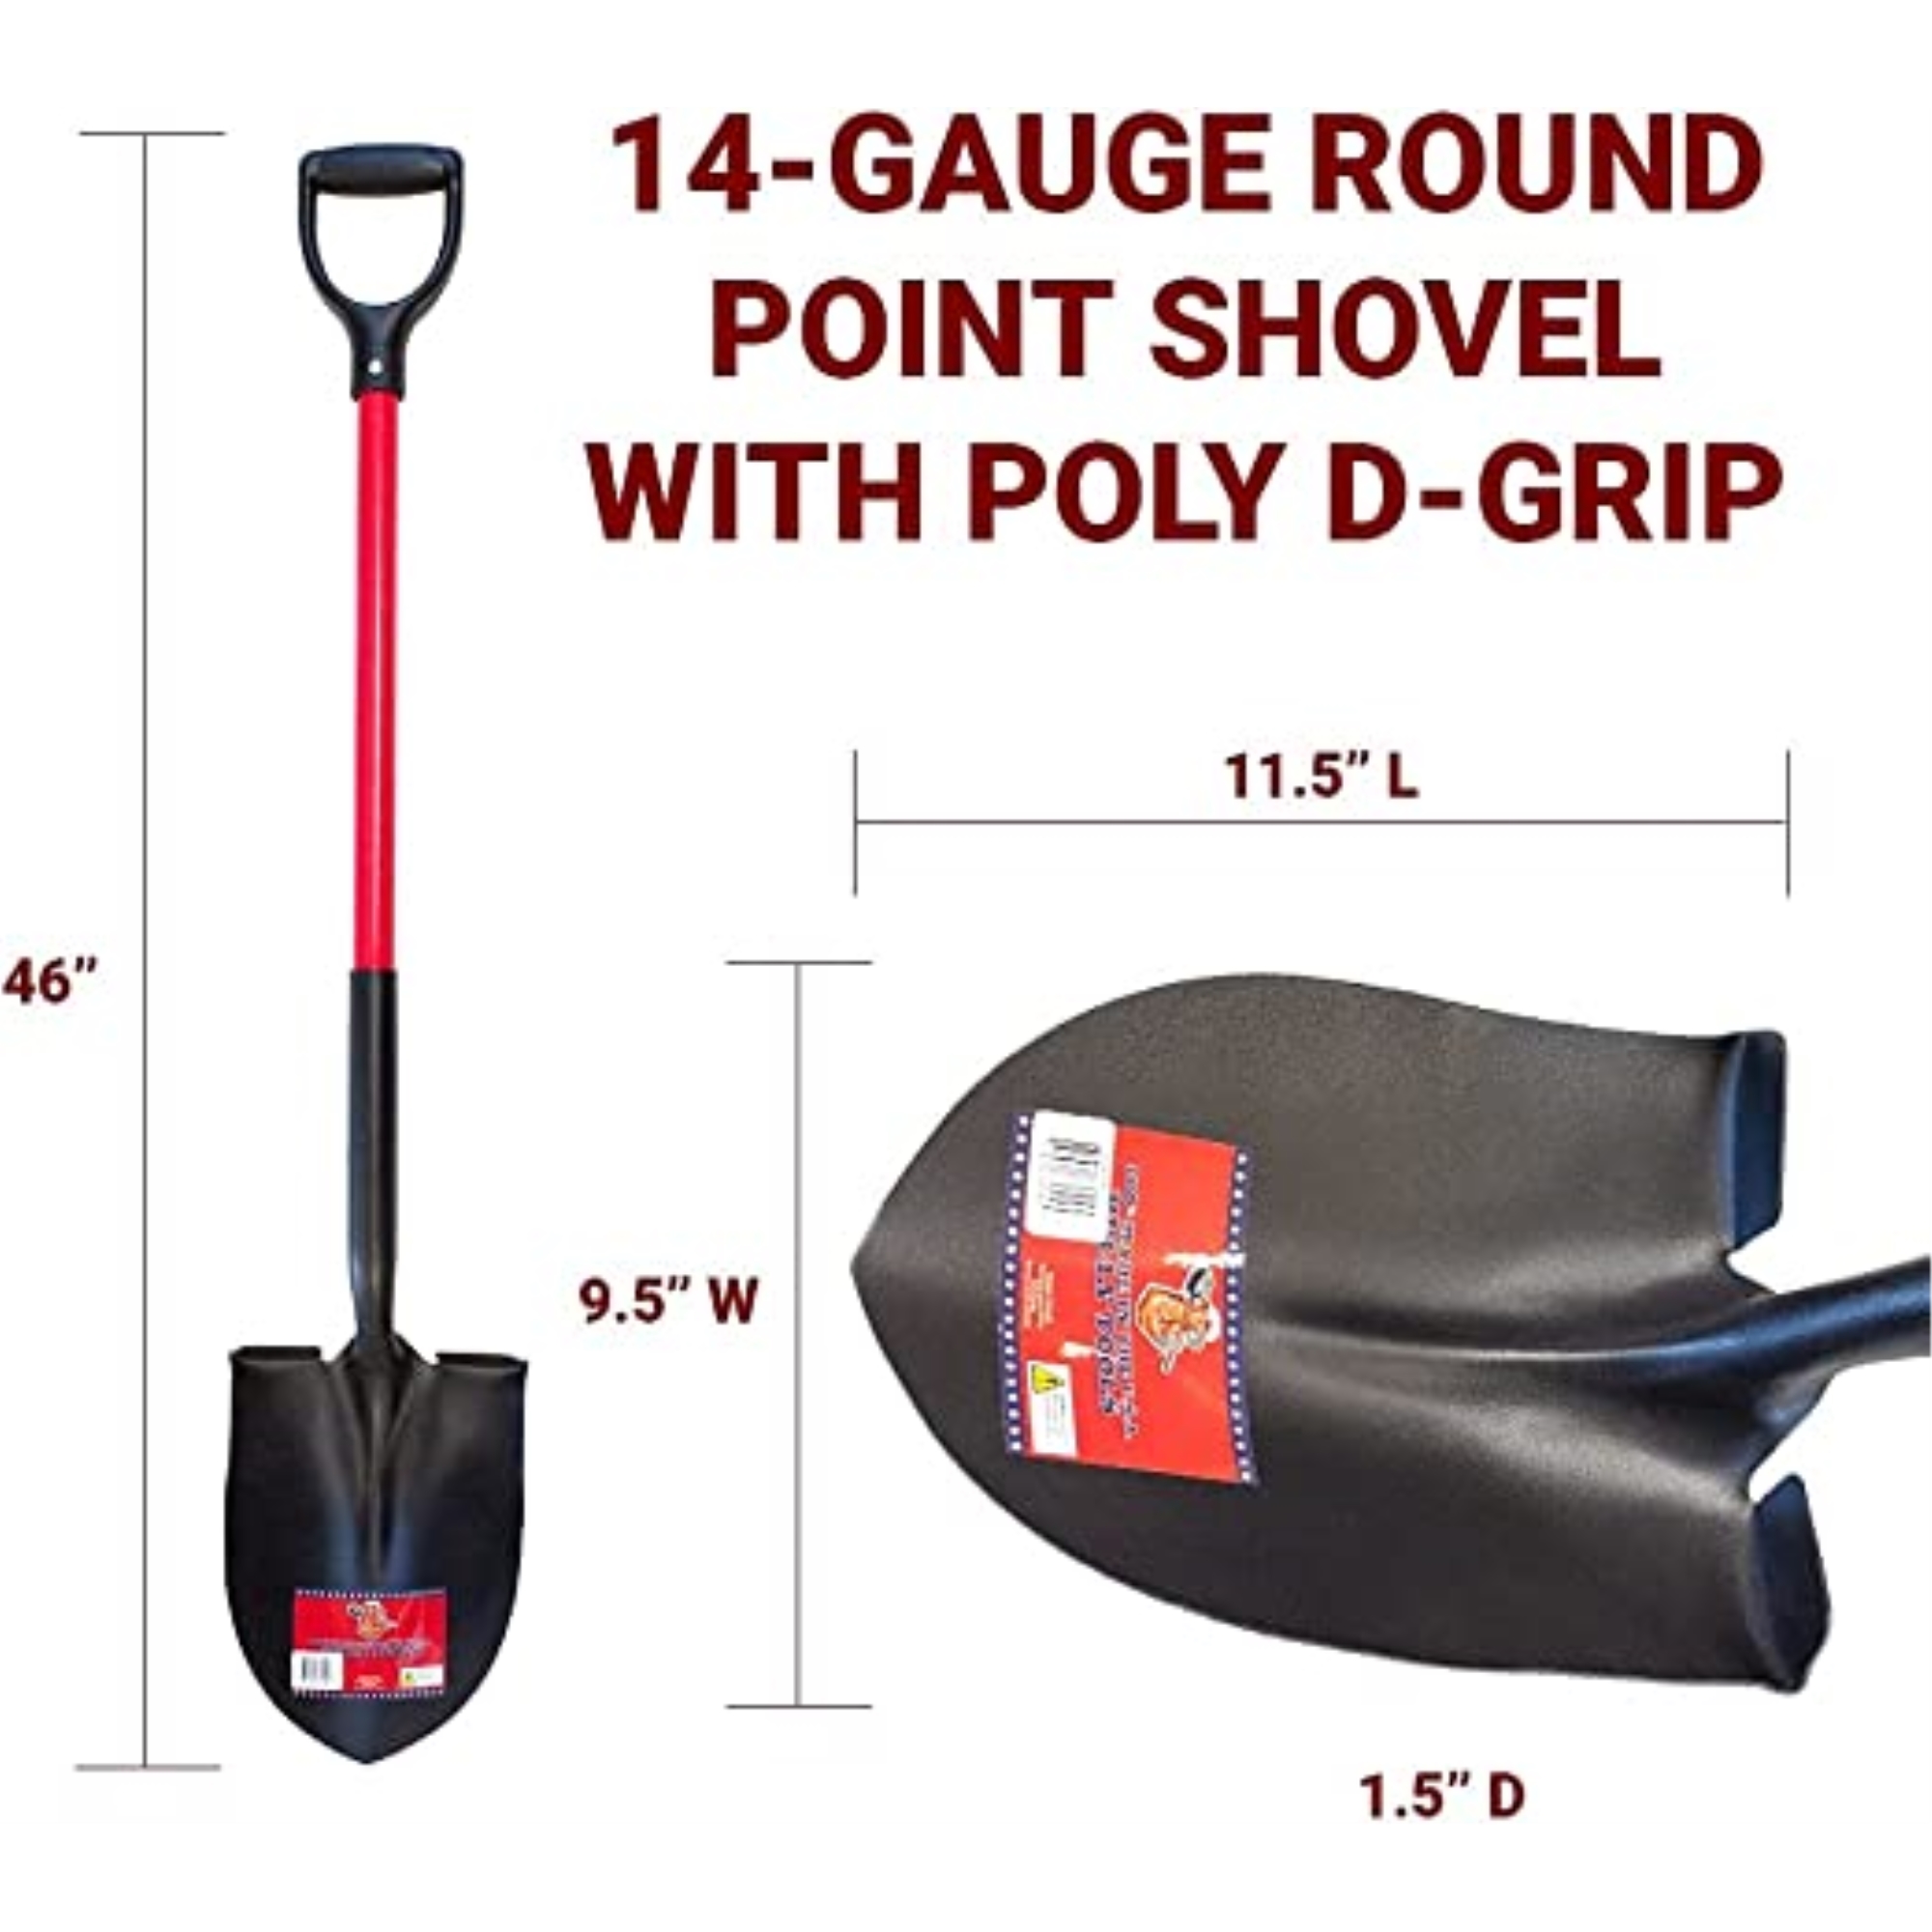 Bully Tools 82510 14-Gauge Round Point Shovel with Fiberglass D-Grip Handle, 46" - image 4 of 4